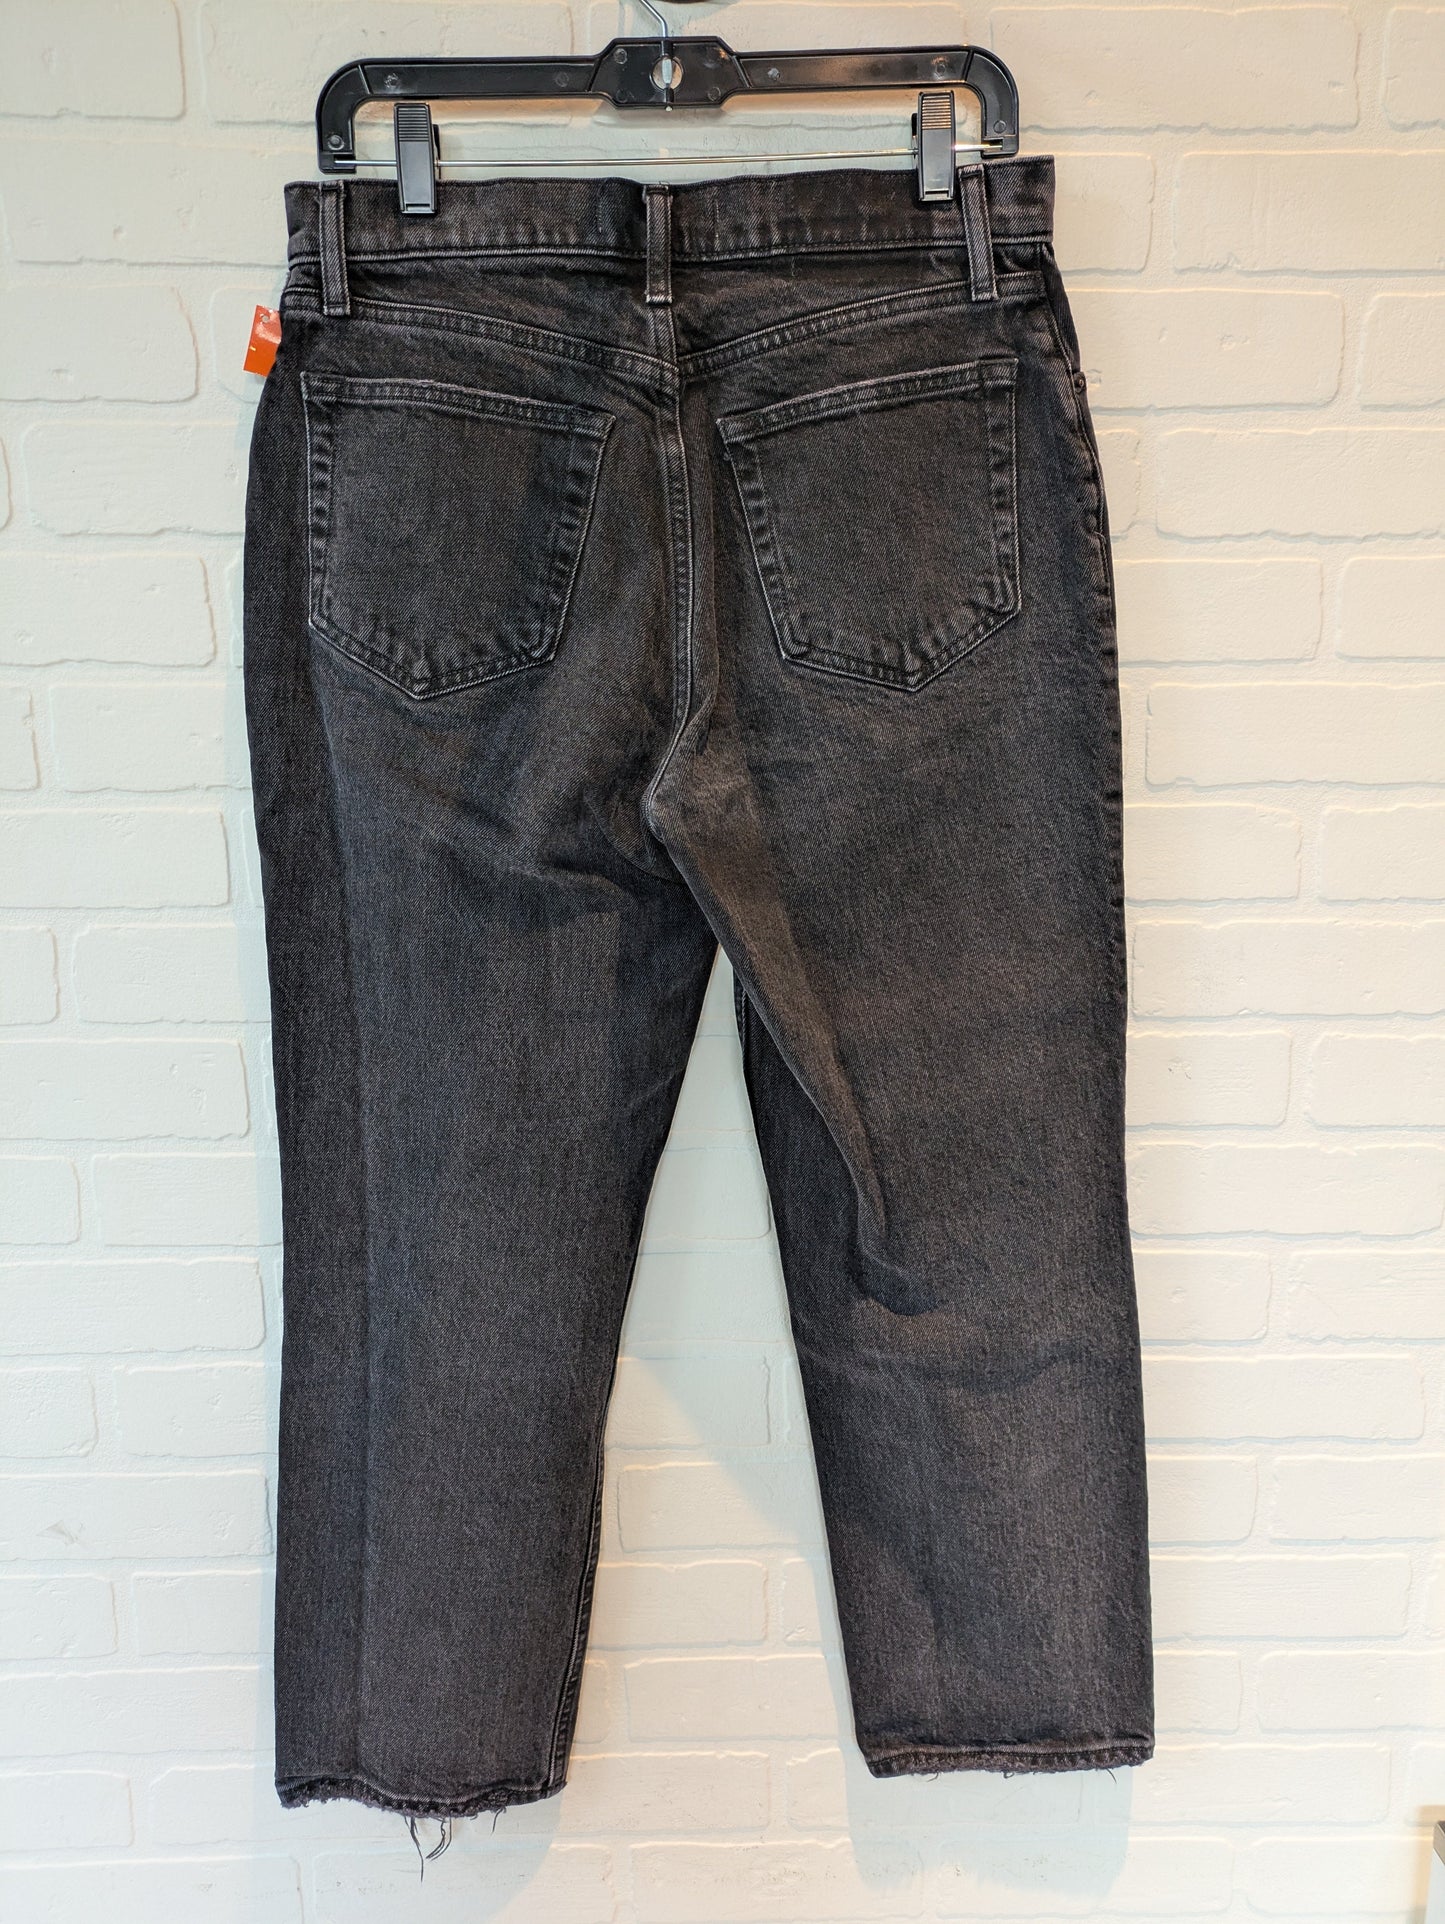 Black Denim Jeans Straight Abercrombie And Fitch, Size 8